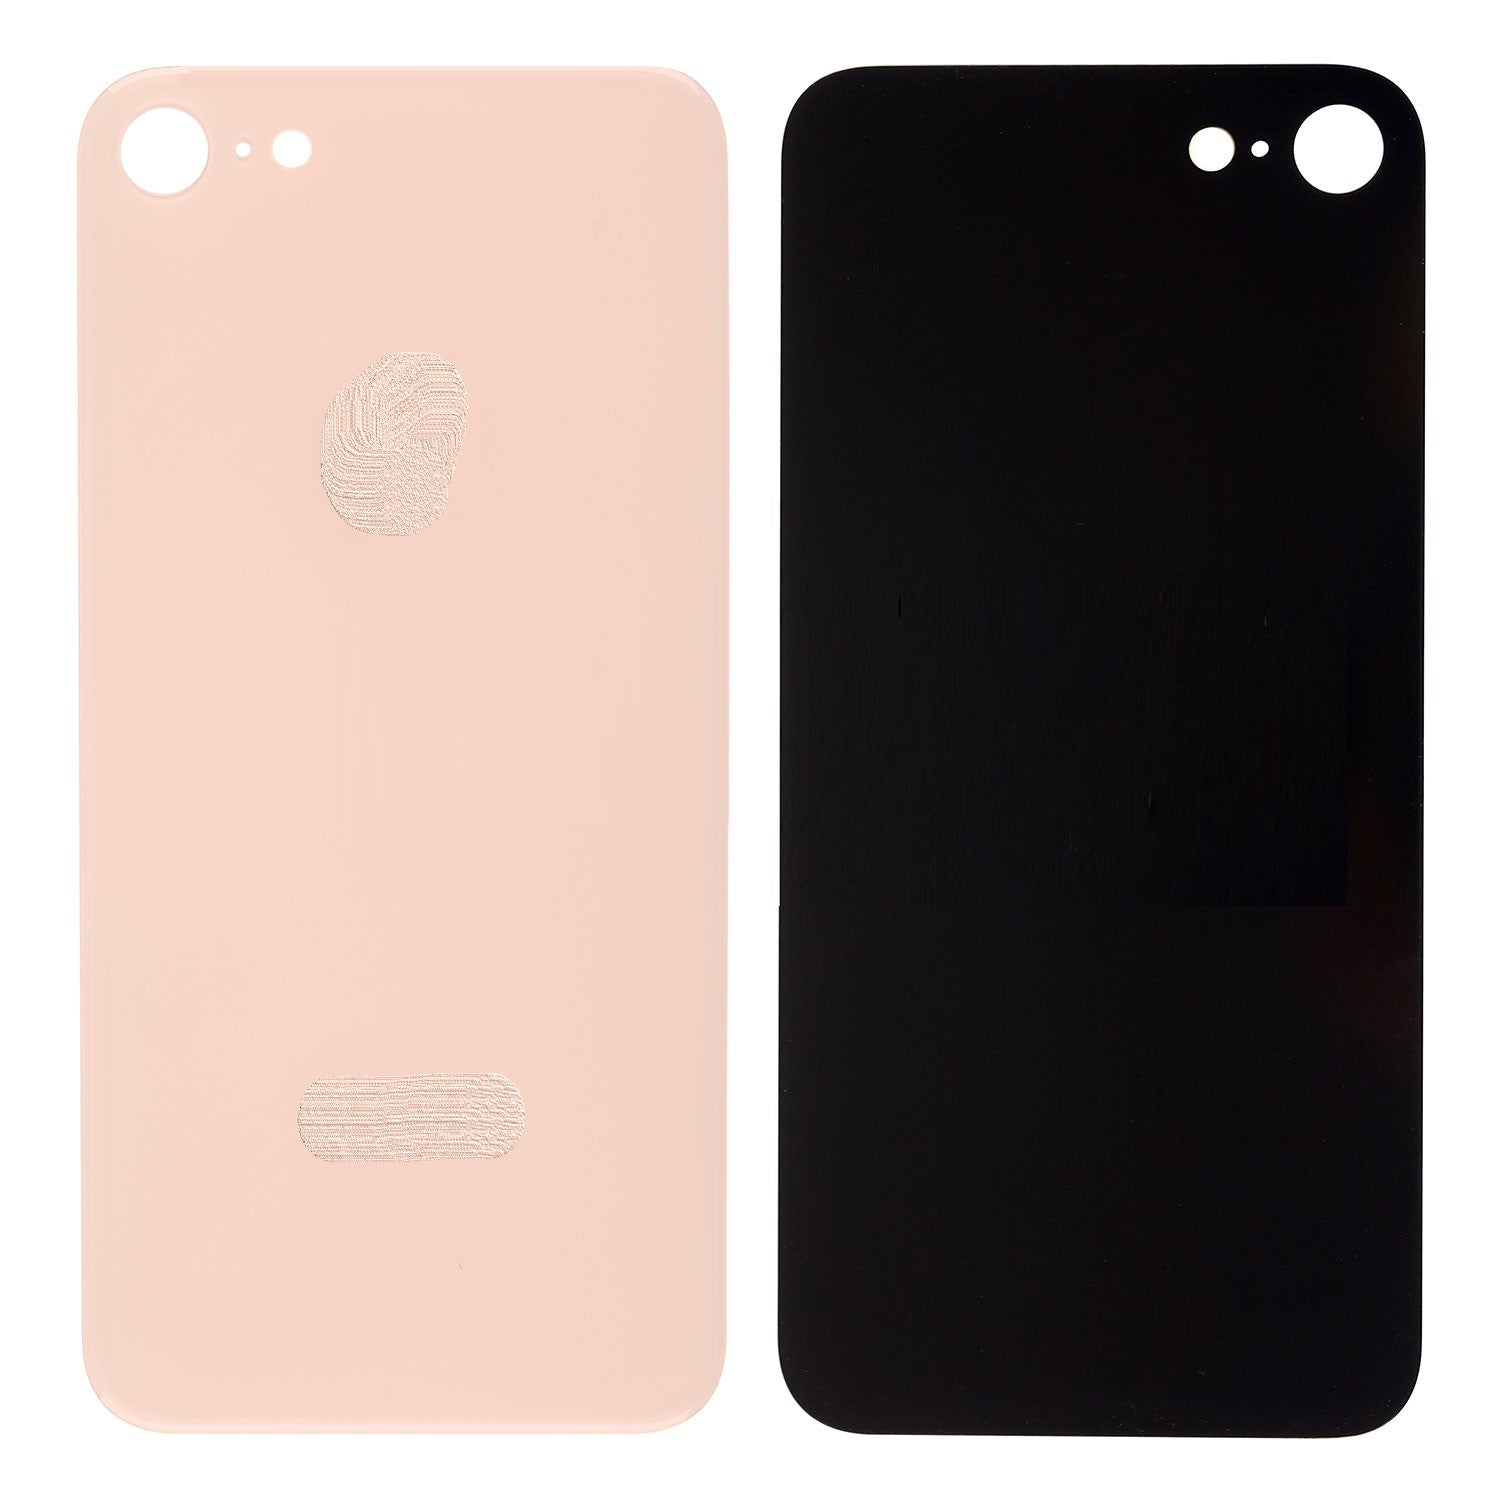 Professional Replacement Back Glass Rear Battery Cover for iPhone 8 All Carriers supported (Big Camera Hole)